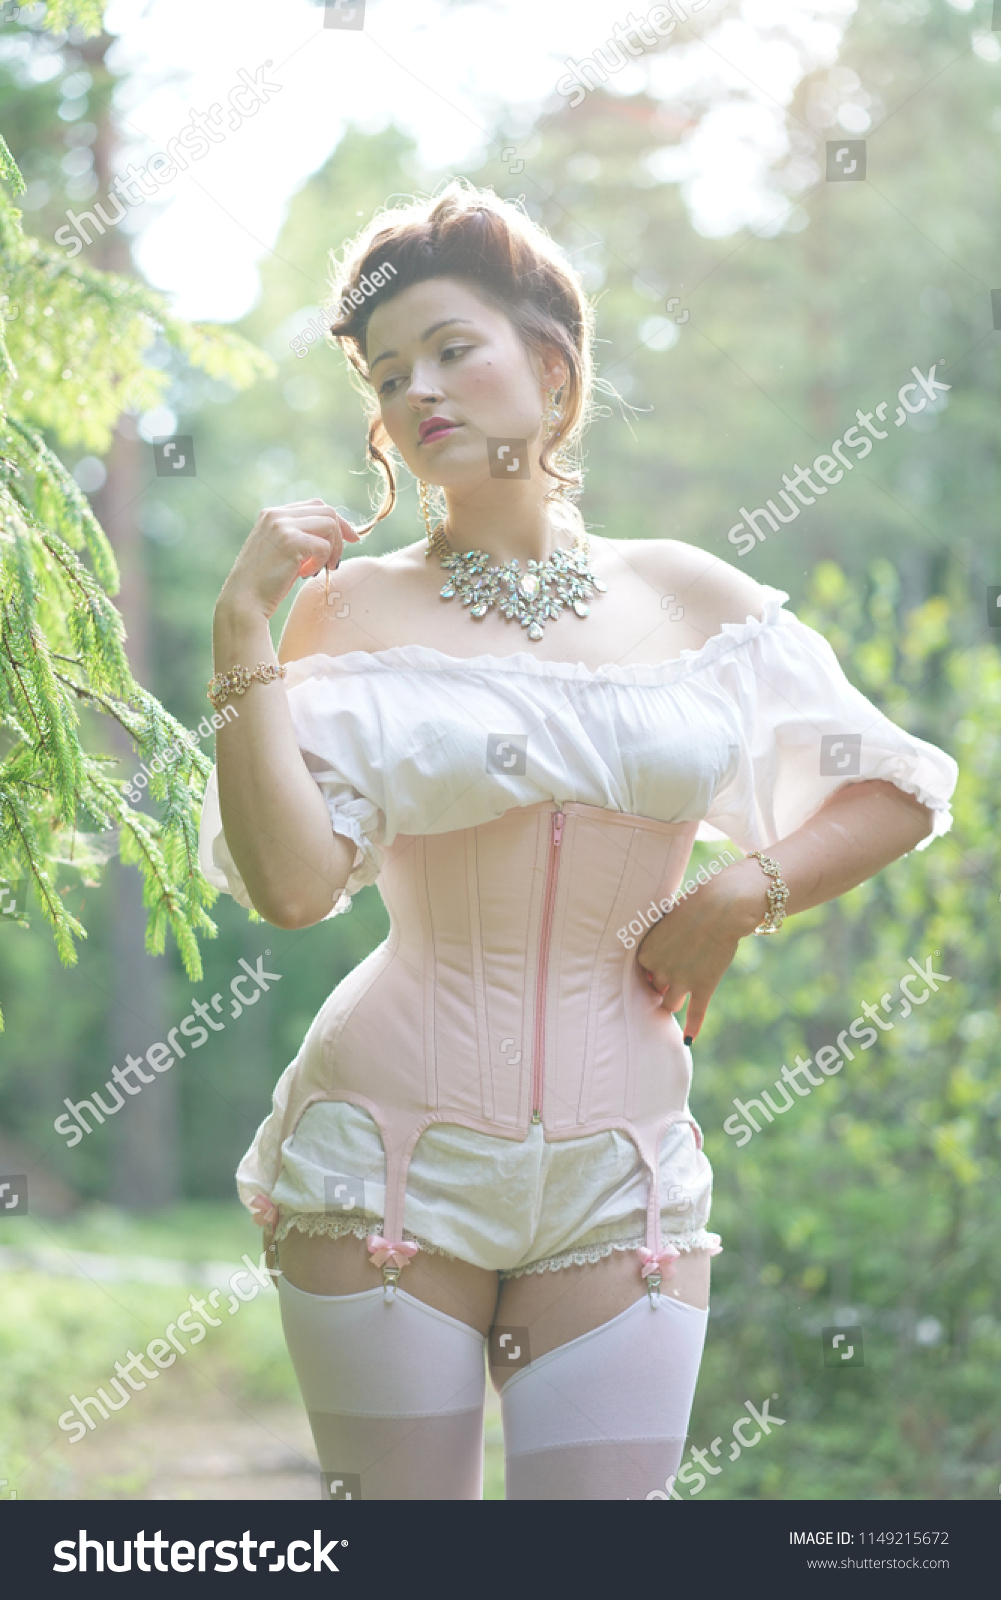 Girl in corset chubby Fashionable Forties: